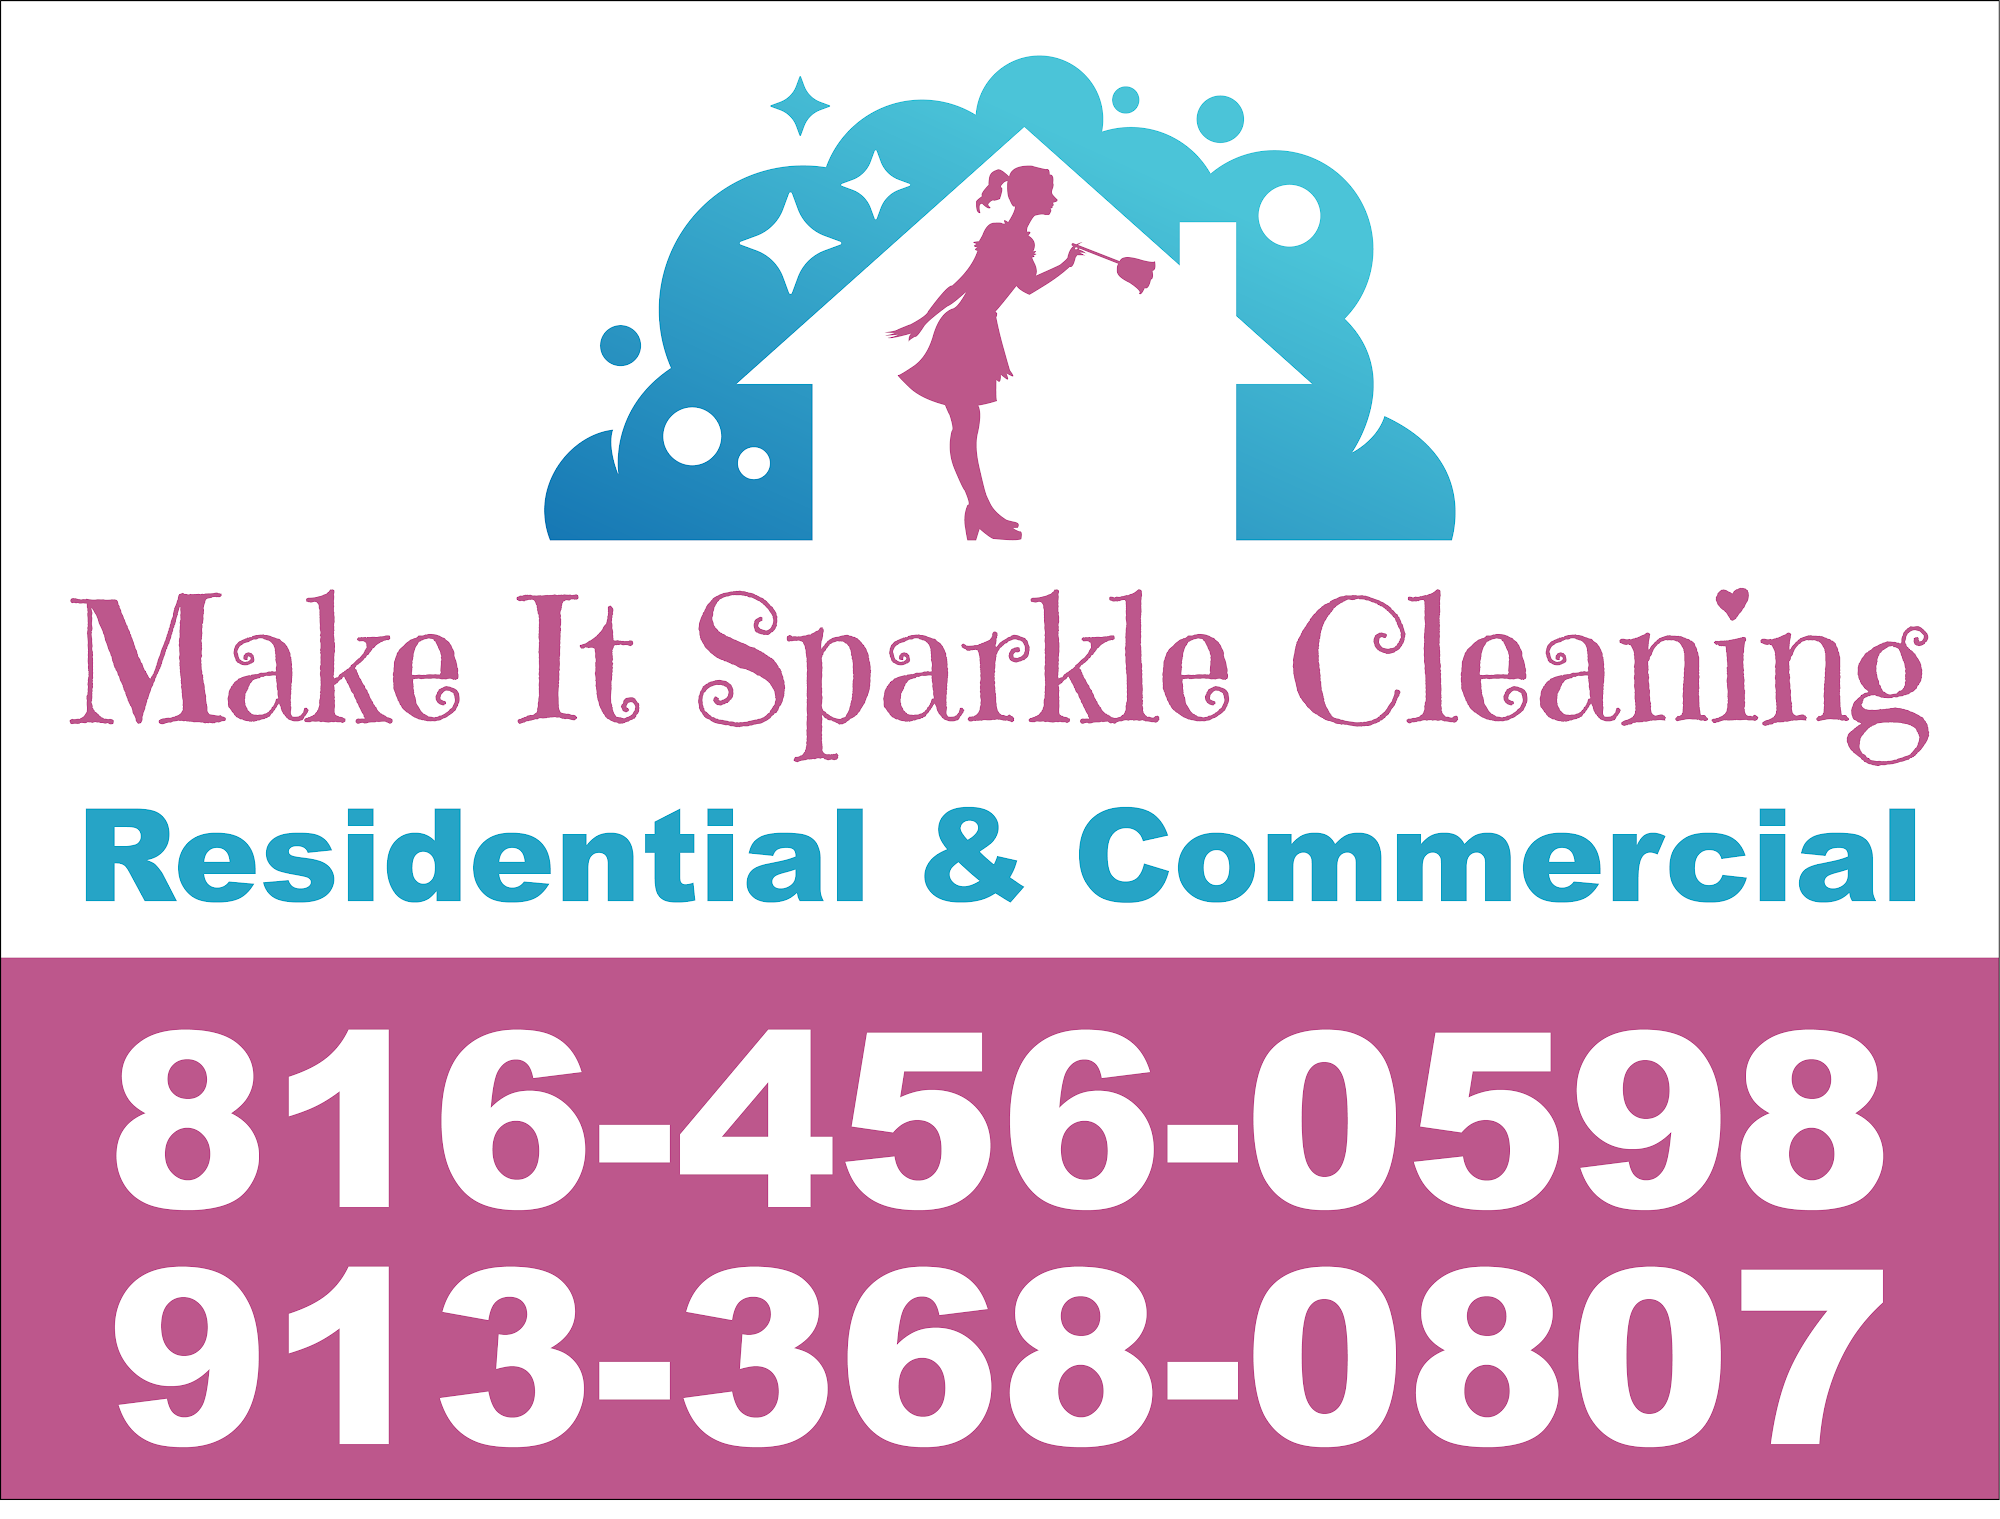 Make It Sparkle Cleaning Service, LLC